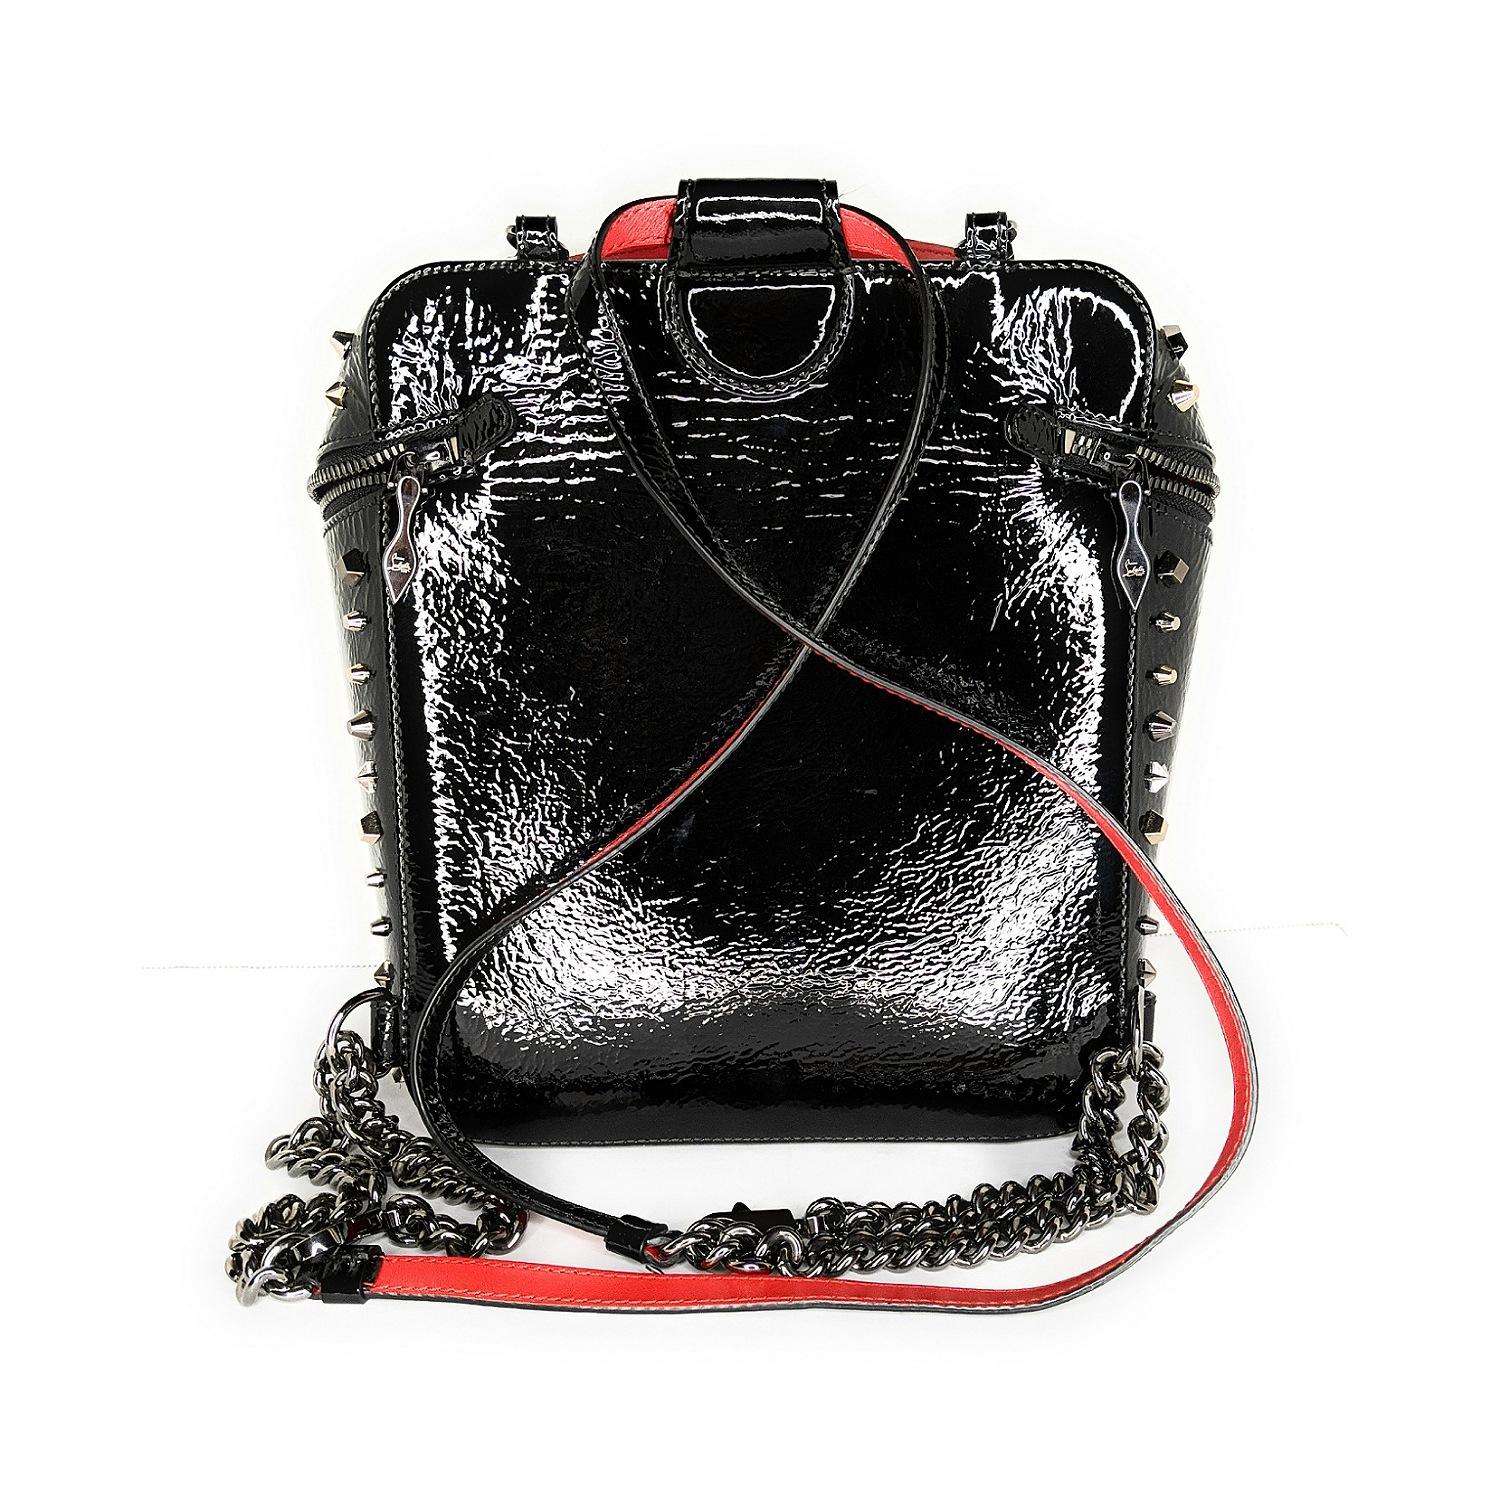 Spiky studs and a polished logo charm enhance the iconic look of a luxe backpack crafted from glossy patent leather and featuring a Louboutin-red interior. The structured silhouette with flat base prevents the bag from tipping over when you put it